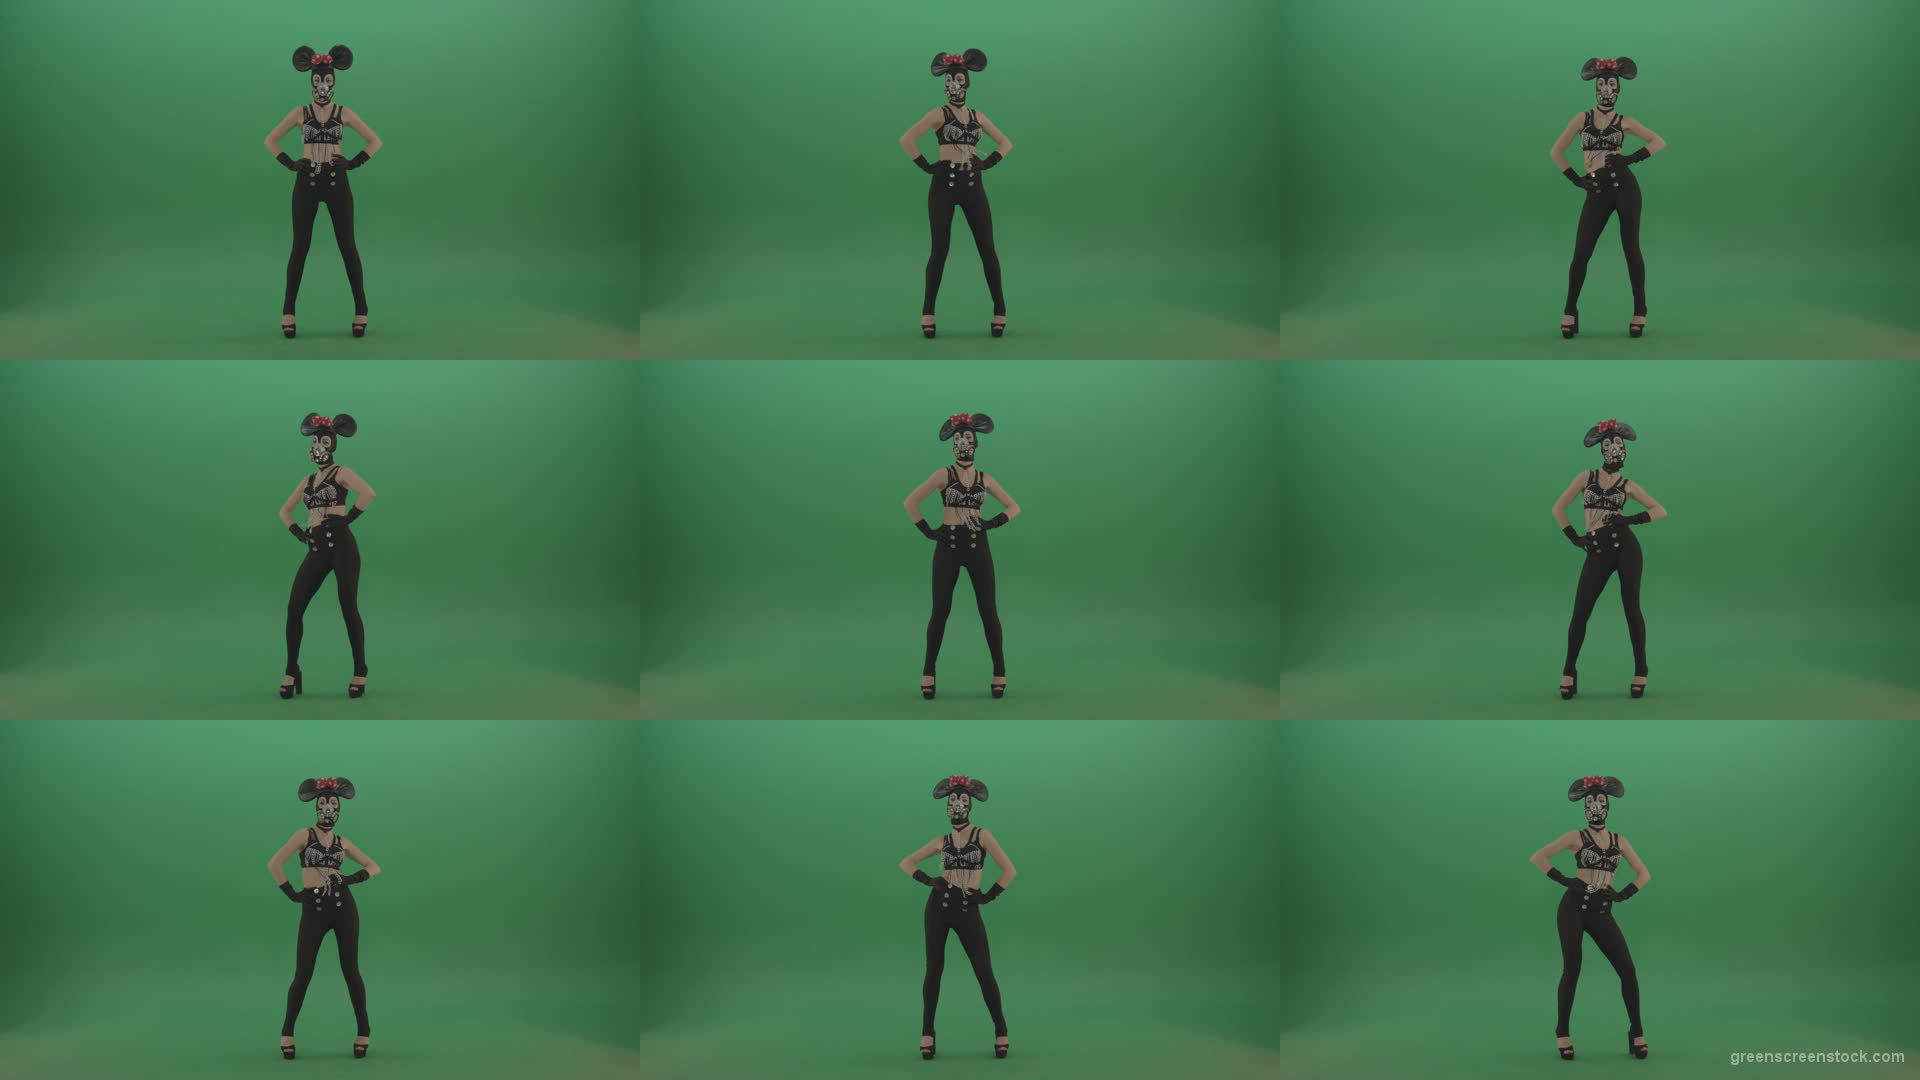 Full-size-strip-girl-in-mouse-costume-and-mask-shaking-ass-and-dancing-on-green-screen-1920 Green Screen Stock